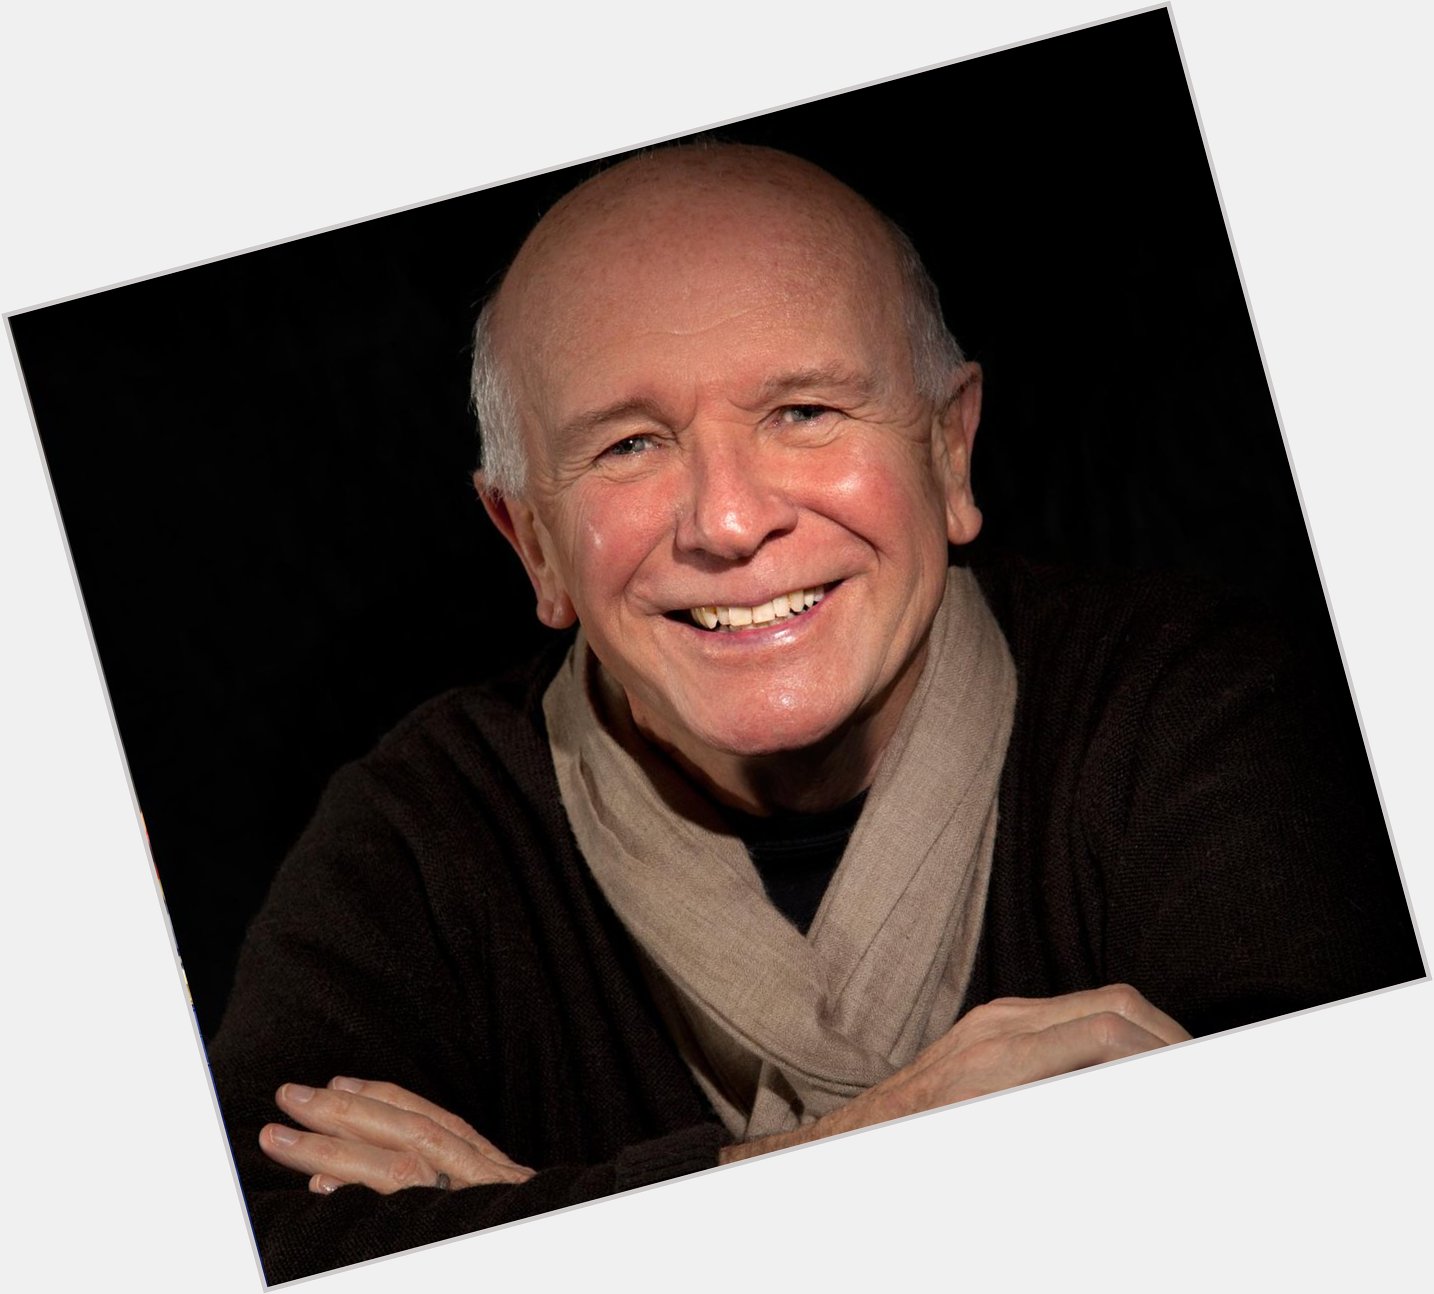 Happy bday to playwright Terrence McNally, whose career has spanned more than 5 decades. 